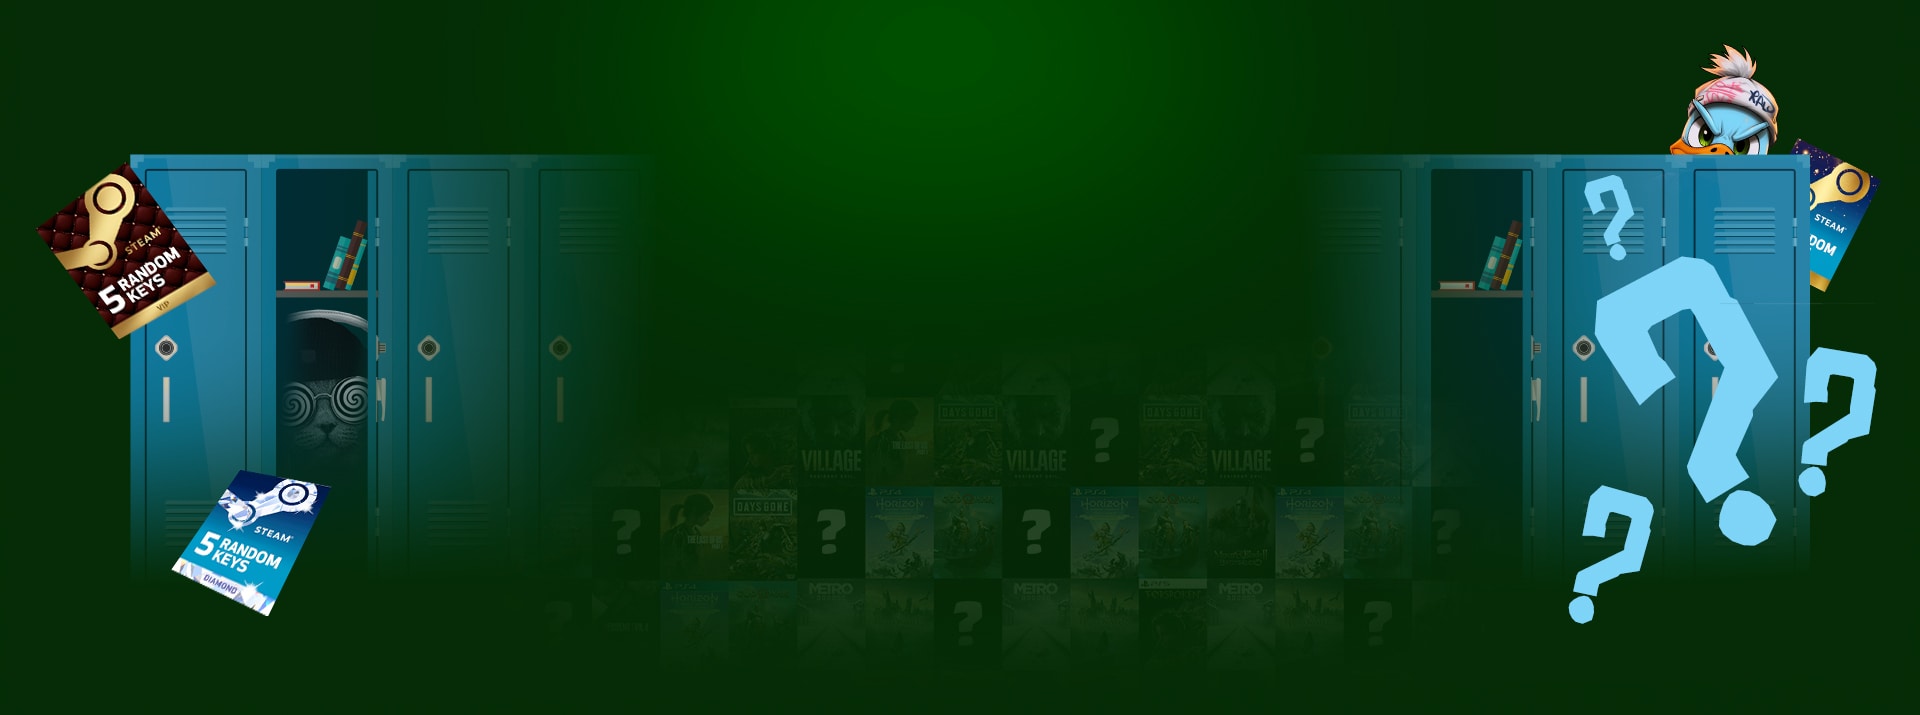 The Outlast Trials (PC) key for Steam - price from $7.86